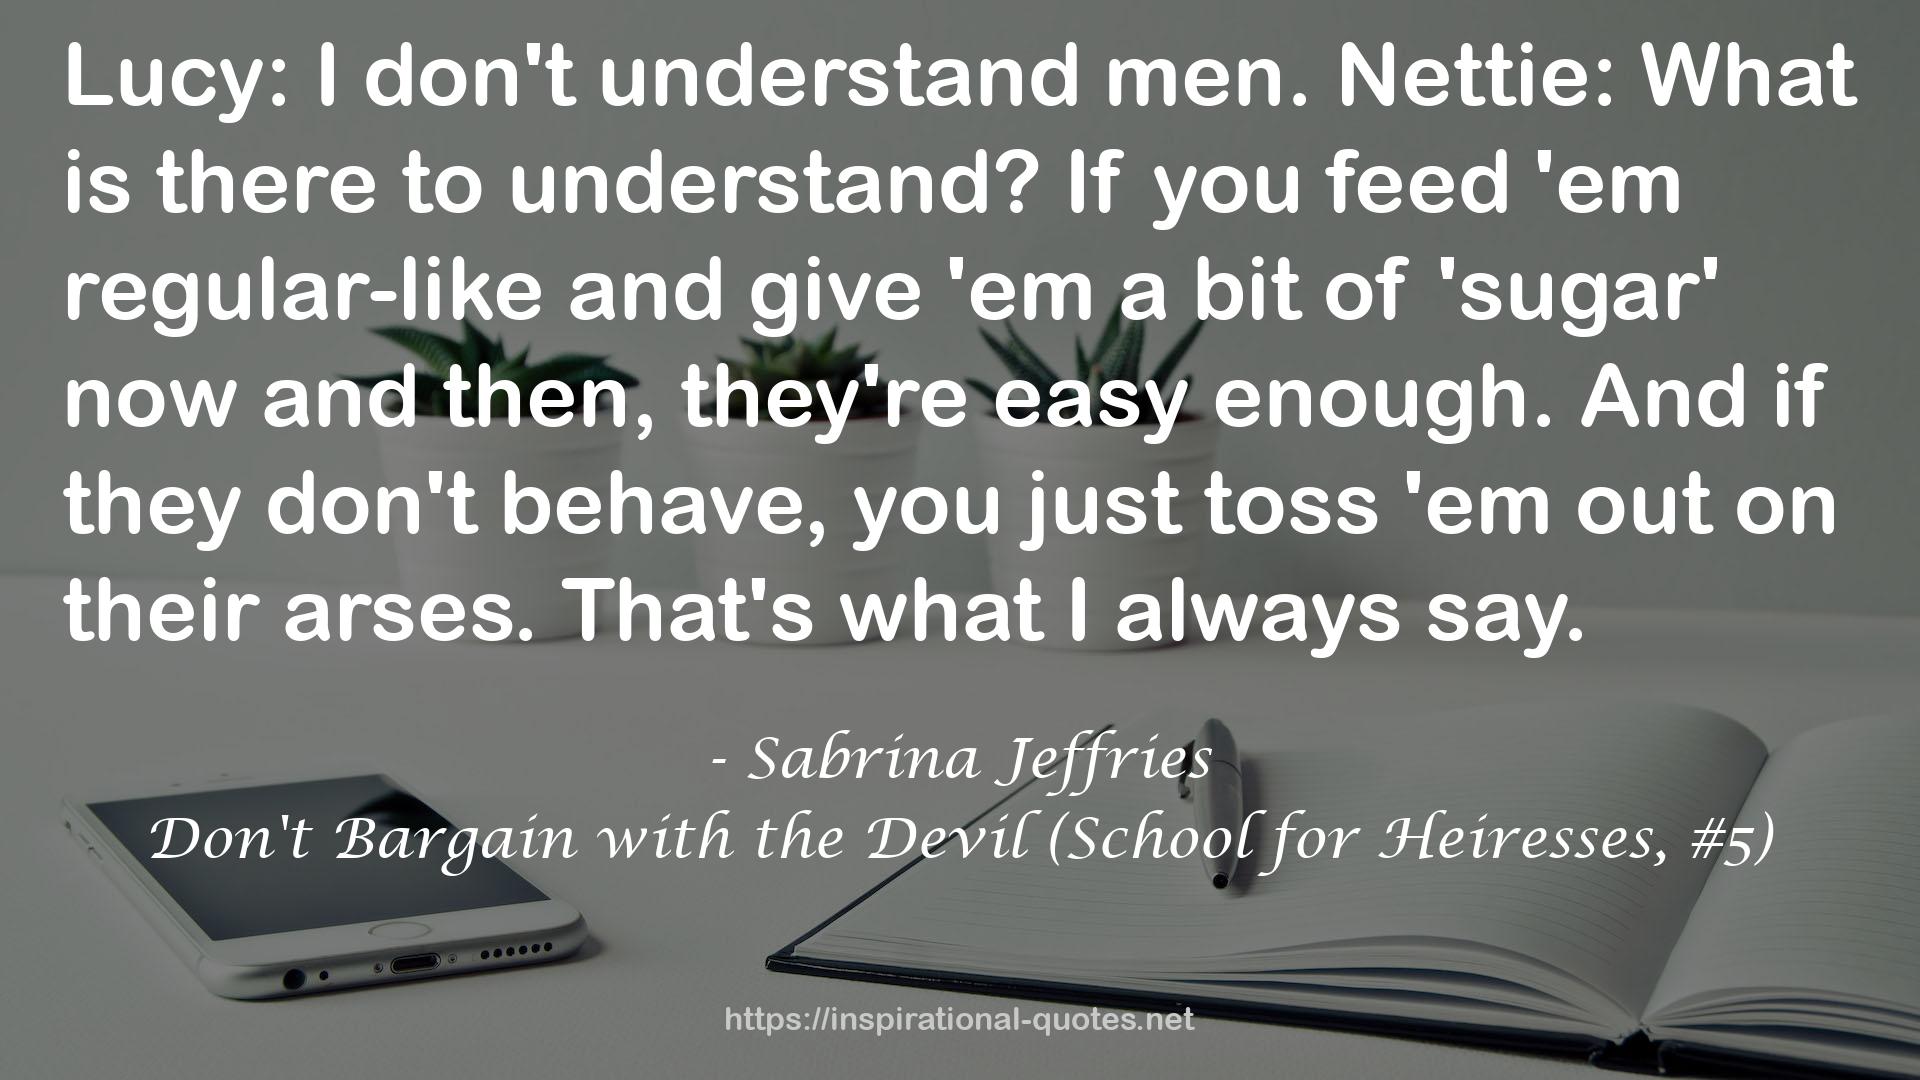 Don't Bargain with the Devil (School for Heiresses, #5) QUOTES